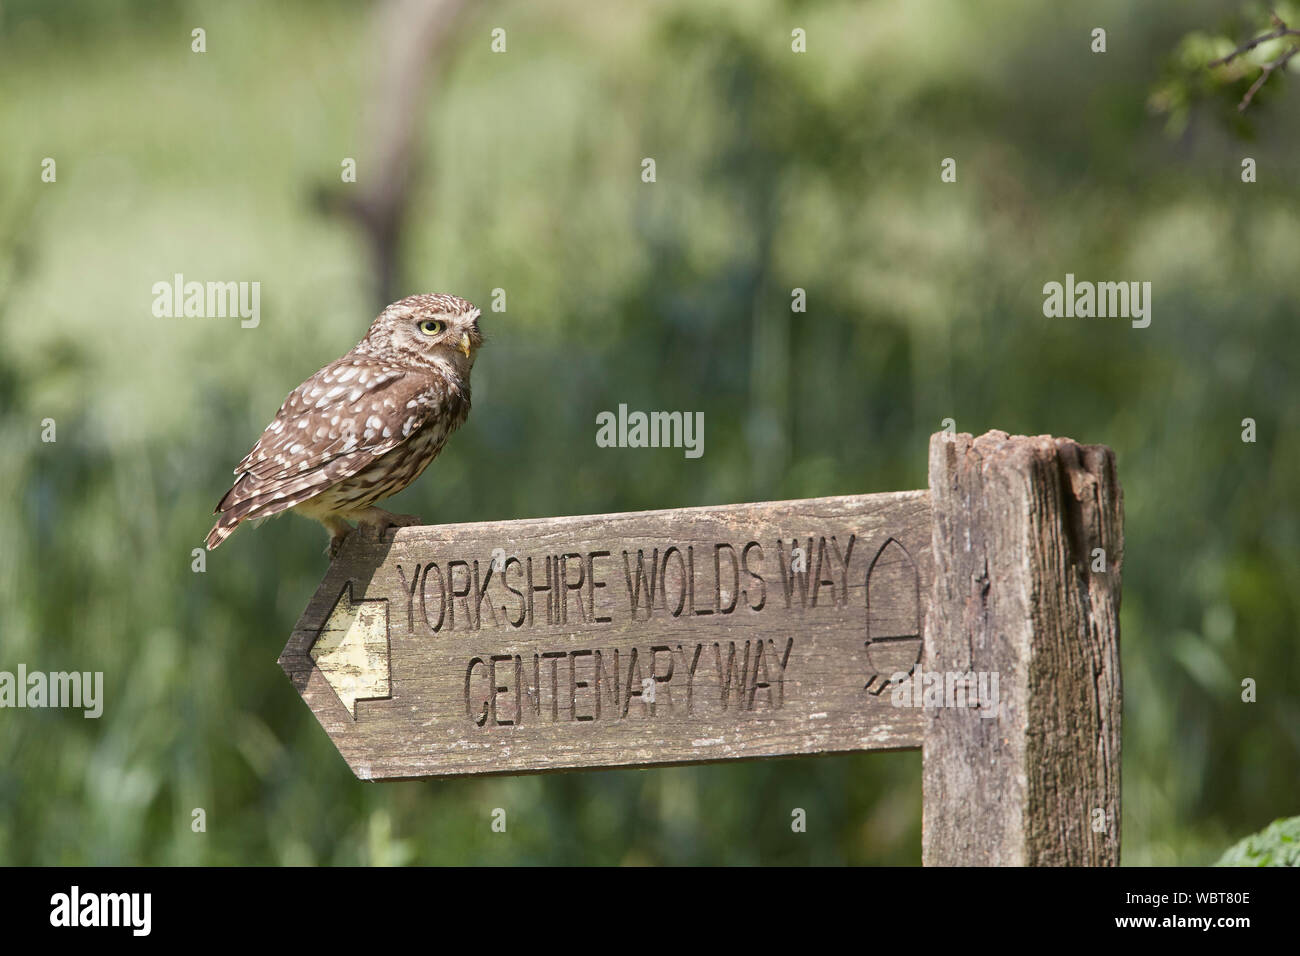 Little Owl, Athene noctua East Yorkshire, UK, standing on a Yorkshire Wolds Way Centenary sign post, introduced to Britain during the 19th century. Stock Photo